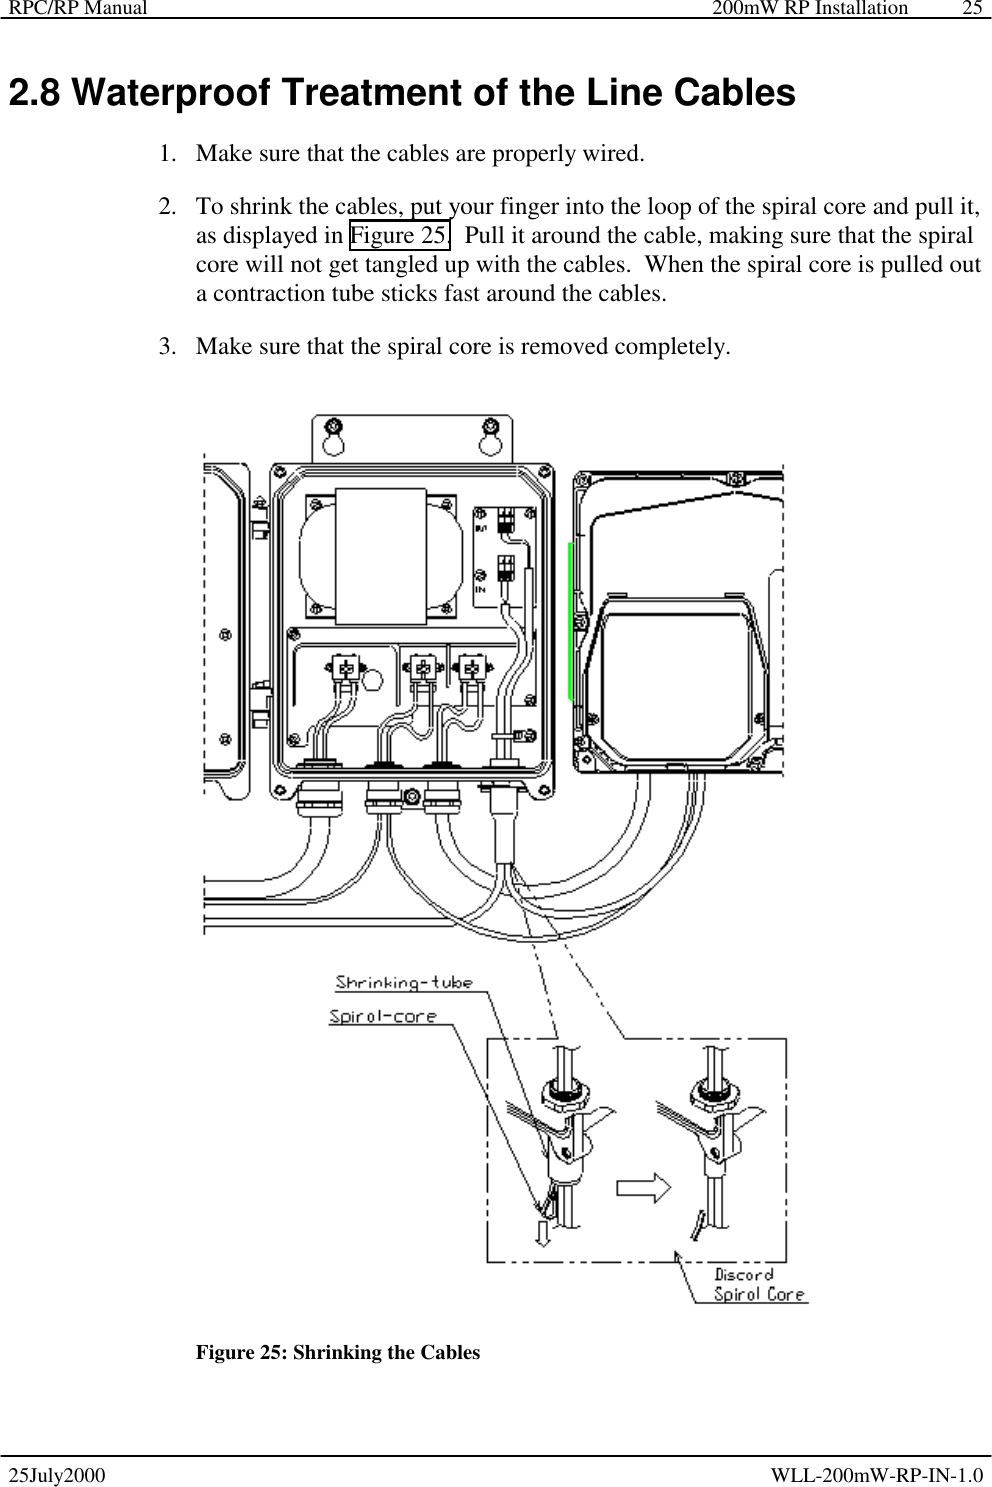 RPC/RP Manual    200mW RP Installation  25July2000  WLL-200mW-RP-IN-1.0 25 2.8 Waterproof Treatment of the Line Cables 1.  Make sure that the cables are properly wired. 2.  To shrink the cables, put your finger into the loop of the spiral core and pull it, as displayed in Figure 25.  Pull it around the cable, making sure that the spiral core will not get tangled up with the cables.  When the spiral core is pulled out a contraction tube sticks fast around the cables. 3.  Make sure that the spiral core is removed completely.  Figure 25: Shrinking the Cables 